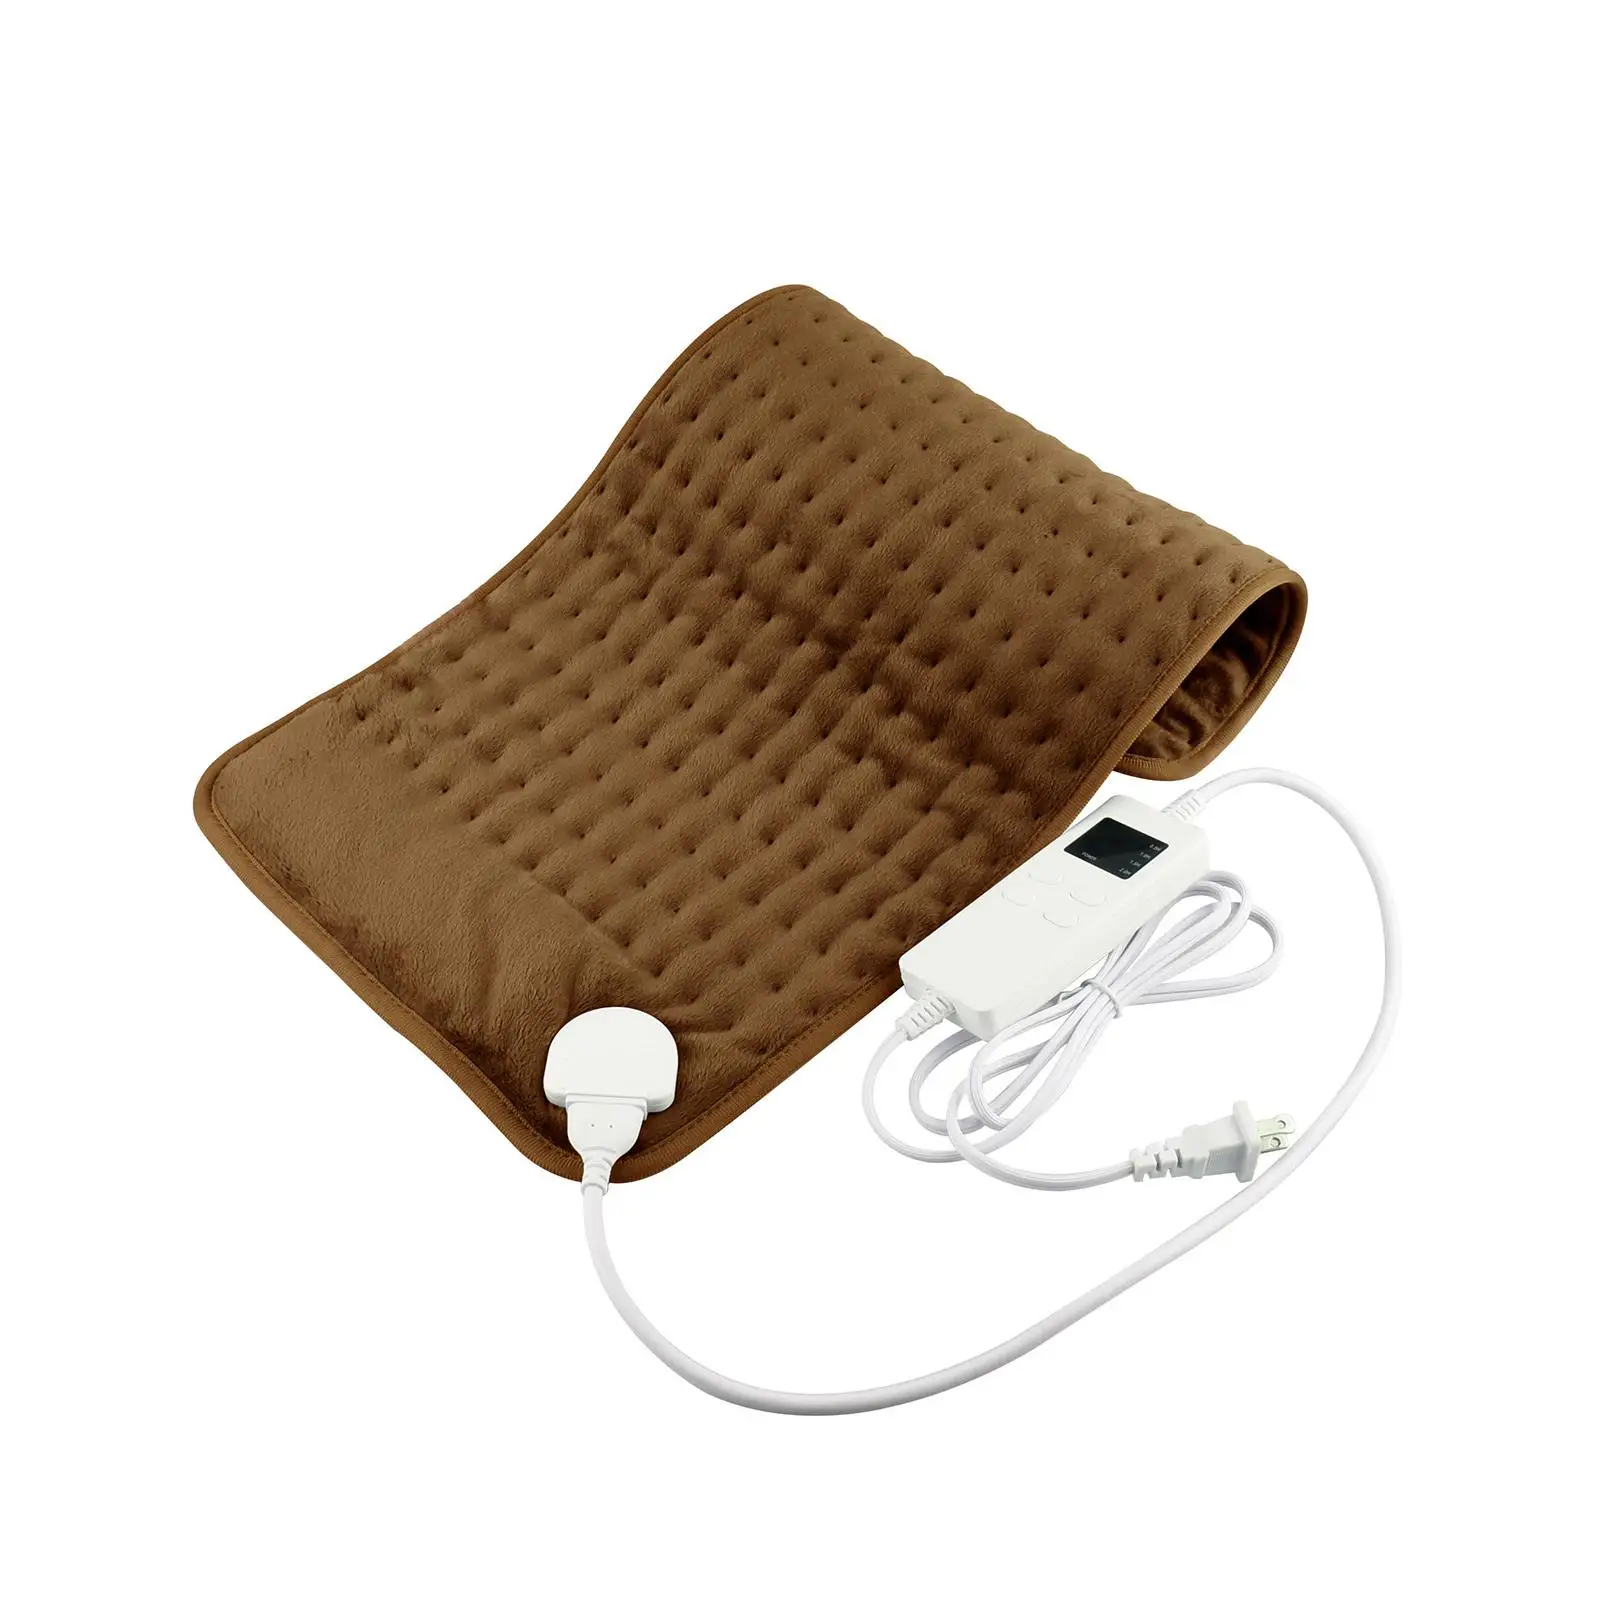 Warm Electric Heating Pad Detachable Fast Heating Auto Shut Off Winter Gifts LED Display Soft Heated Blanket Mat for Waists Legs